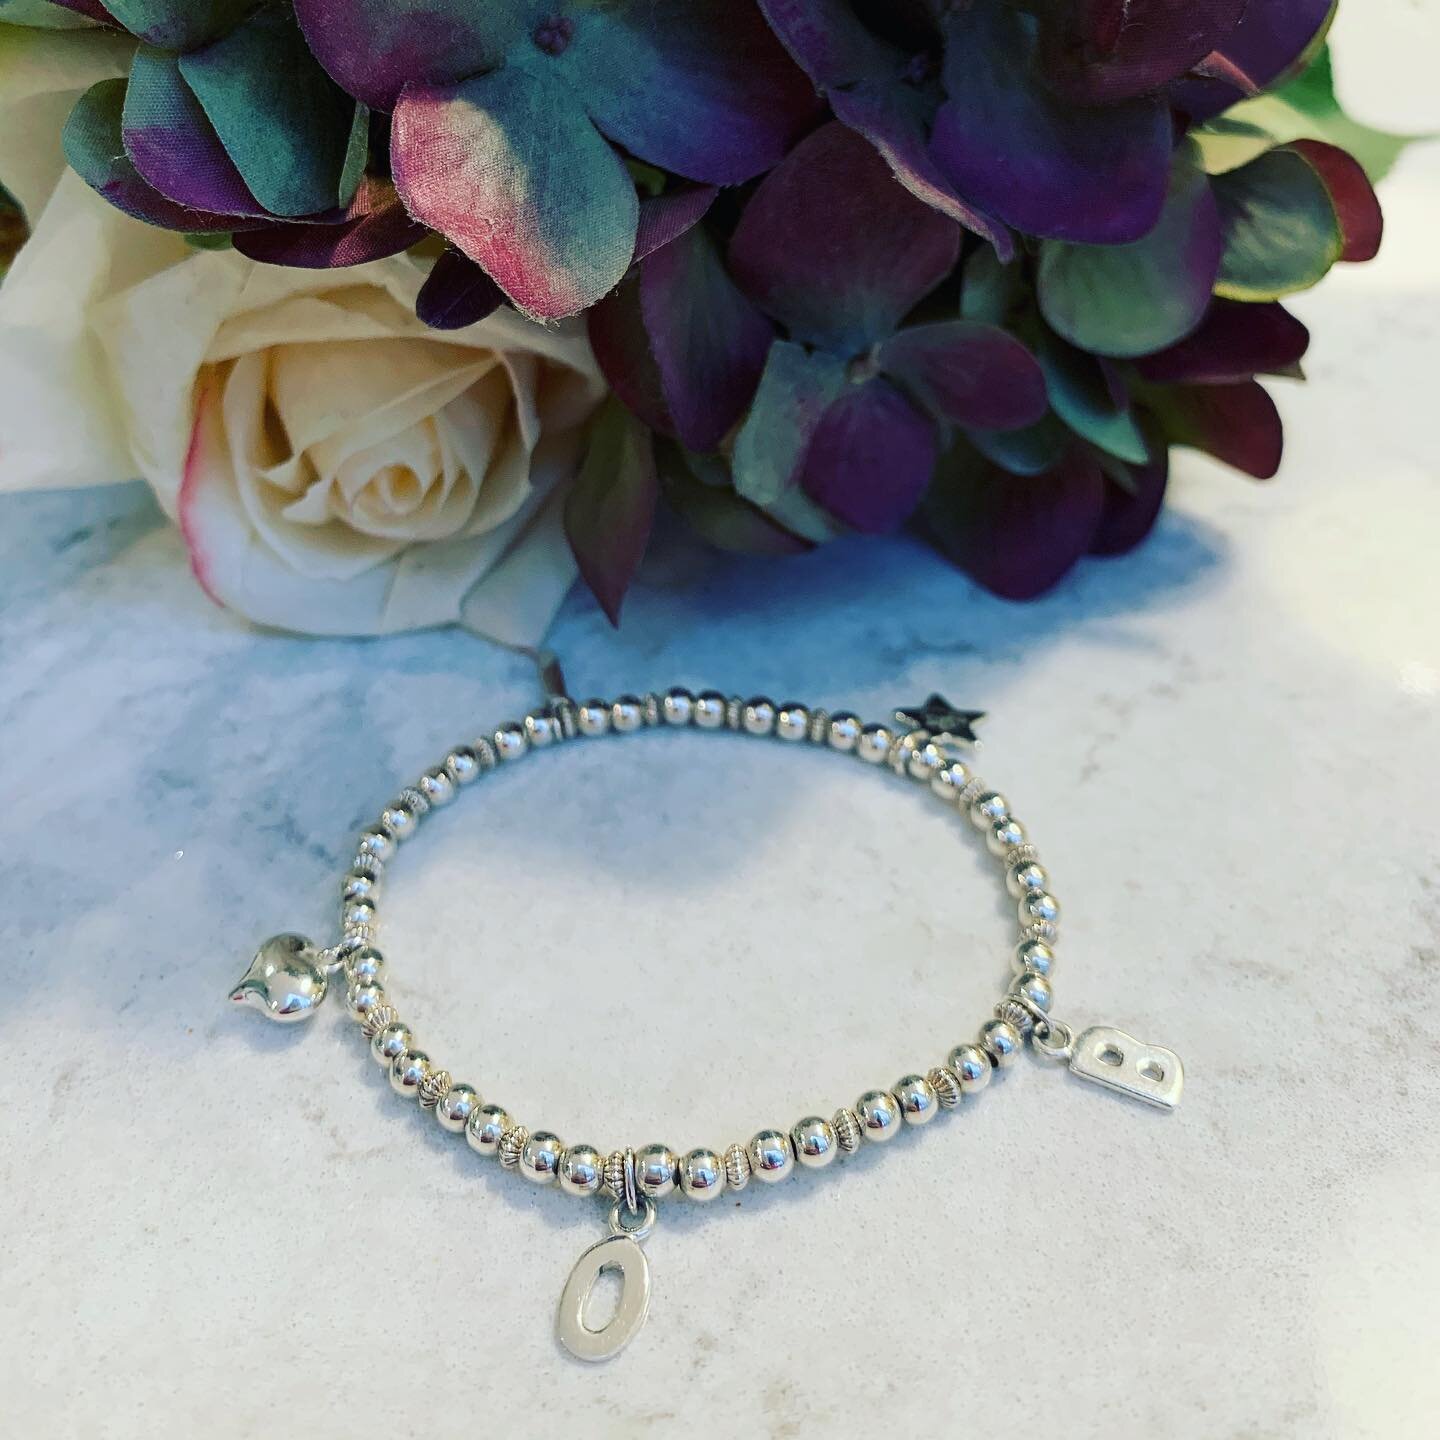 The initial bracelet, can be customised with up to 4 letters or a combination of letters and charms. Gorgeous gift idea for Mother&rsquo;s Day. X